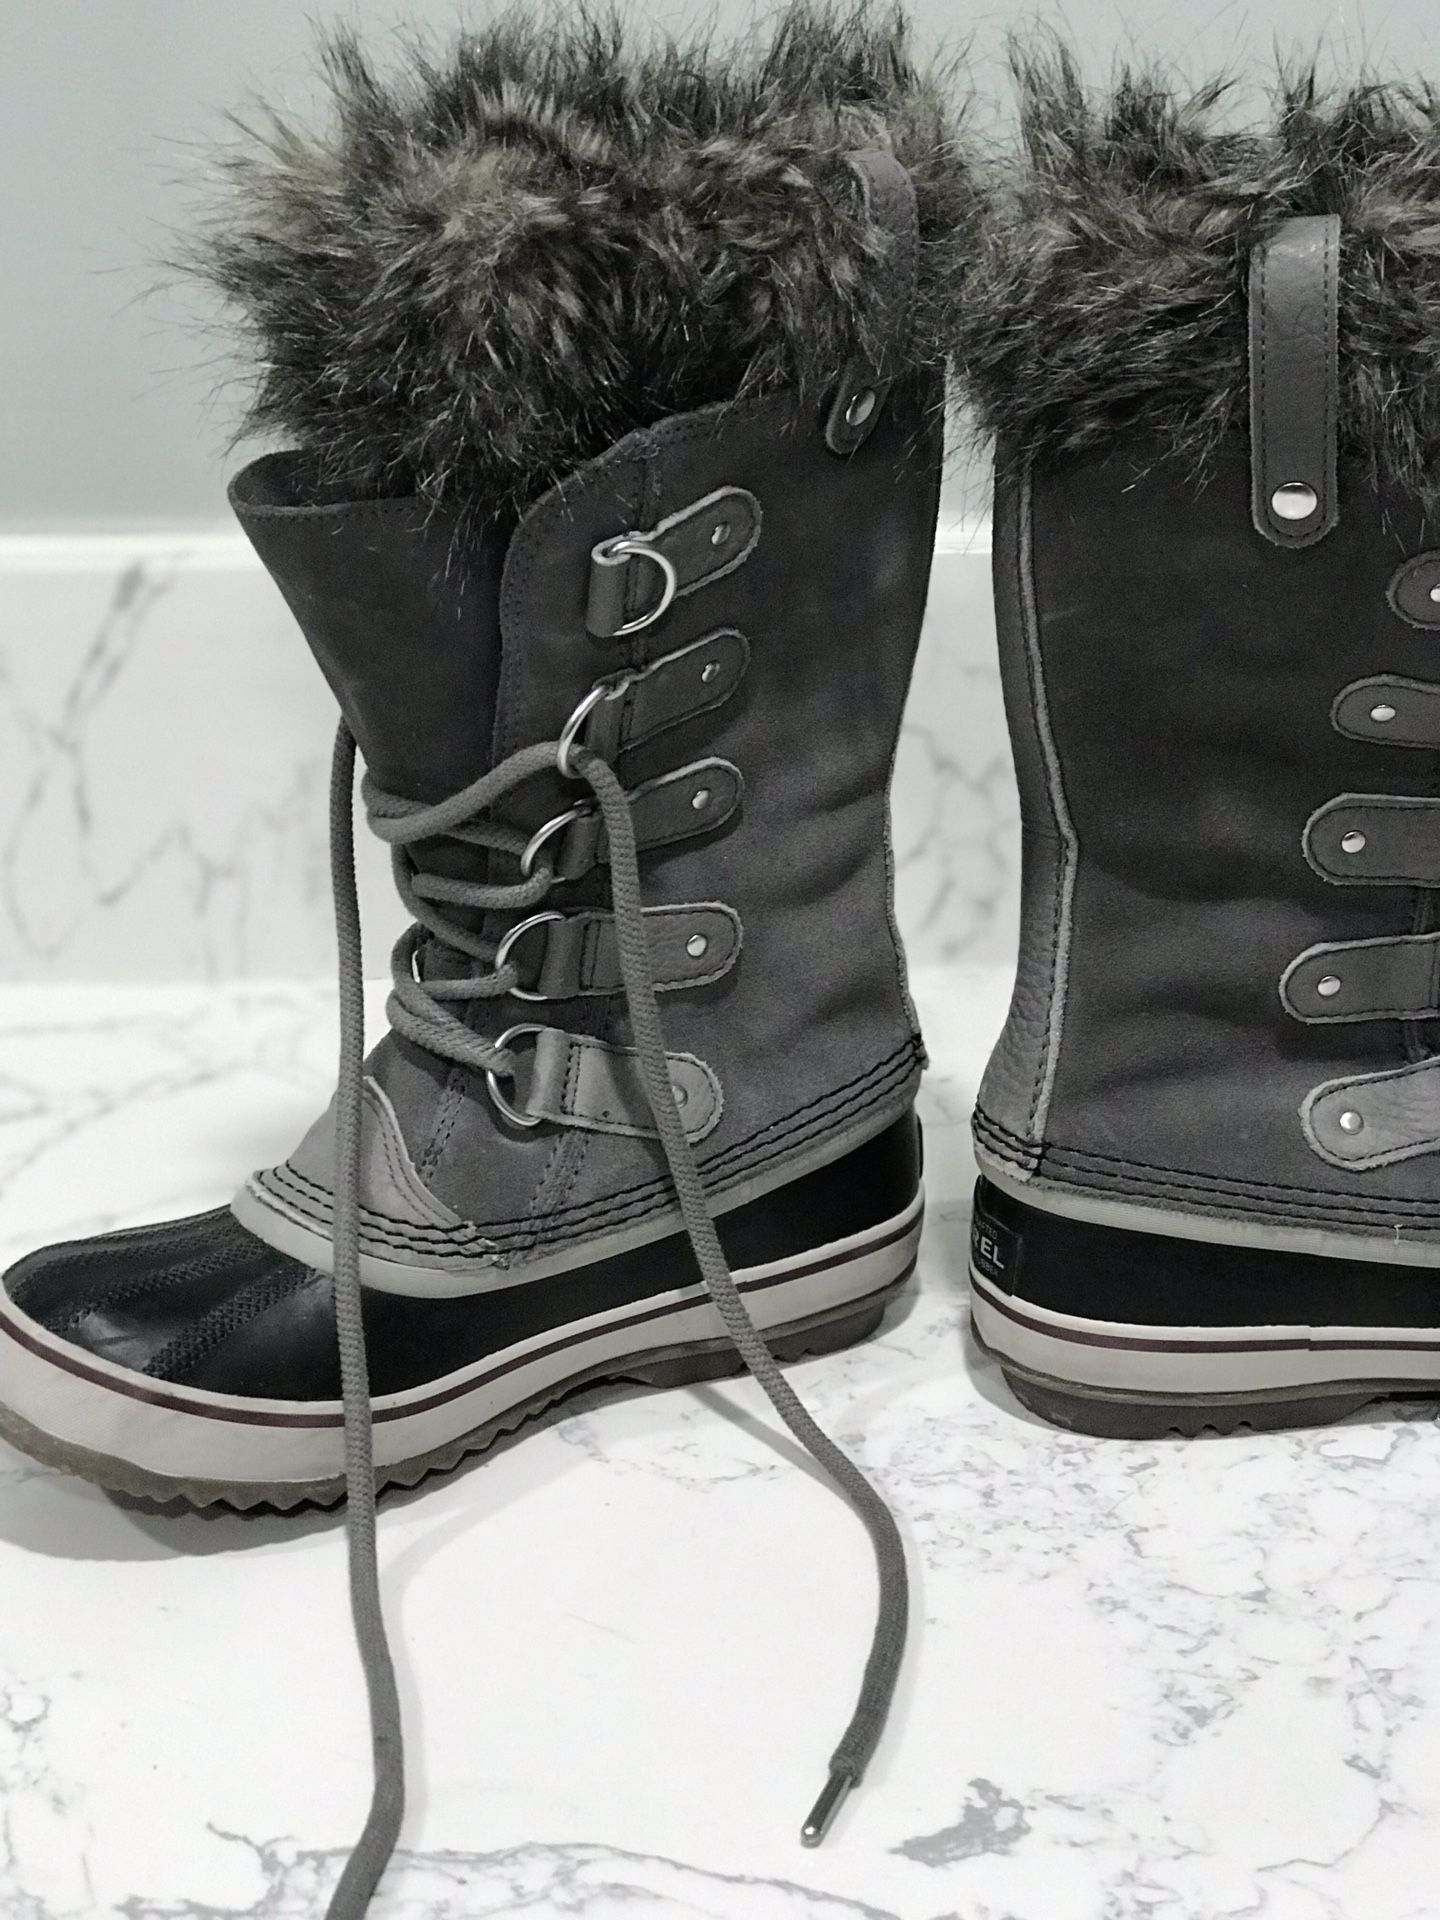 Sorel leather black and grey fur snow boots women’s size 7.5